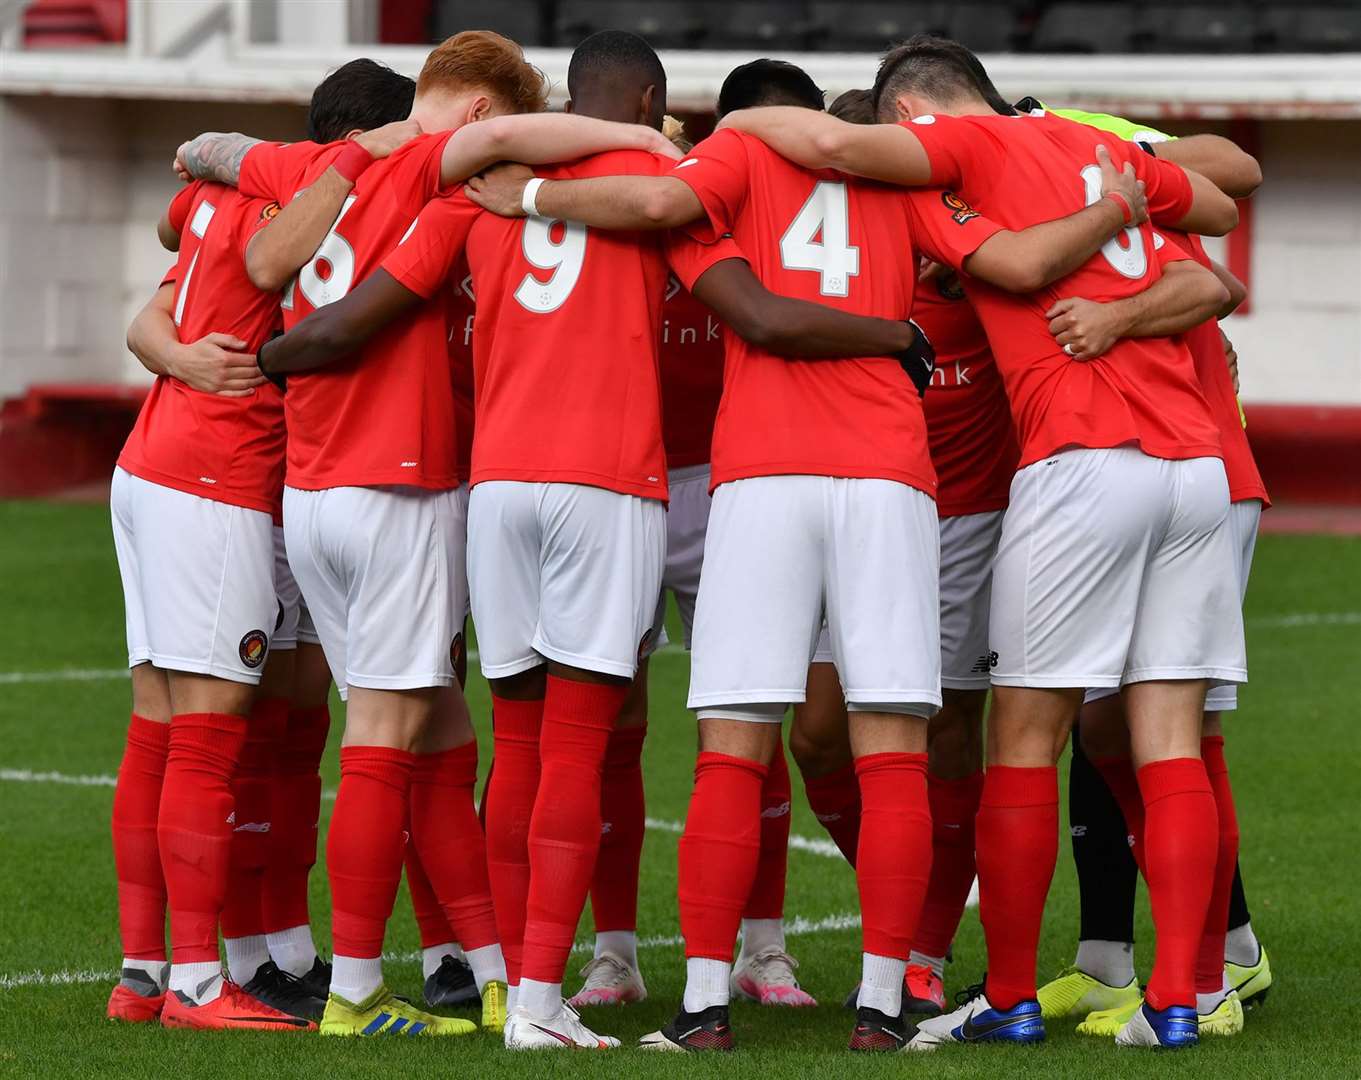 Ebbsfleet players in a pre-match huddle in October. Picture: Keith Gillard